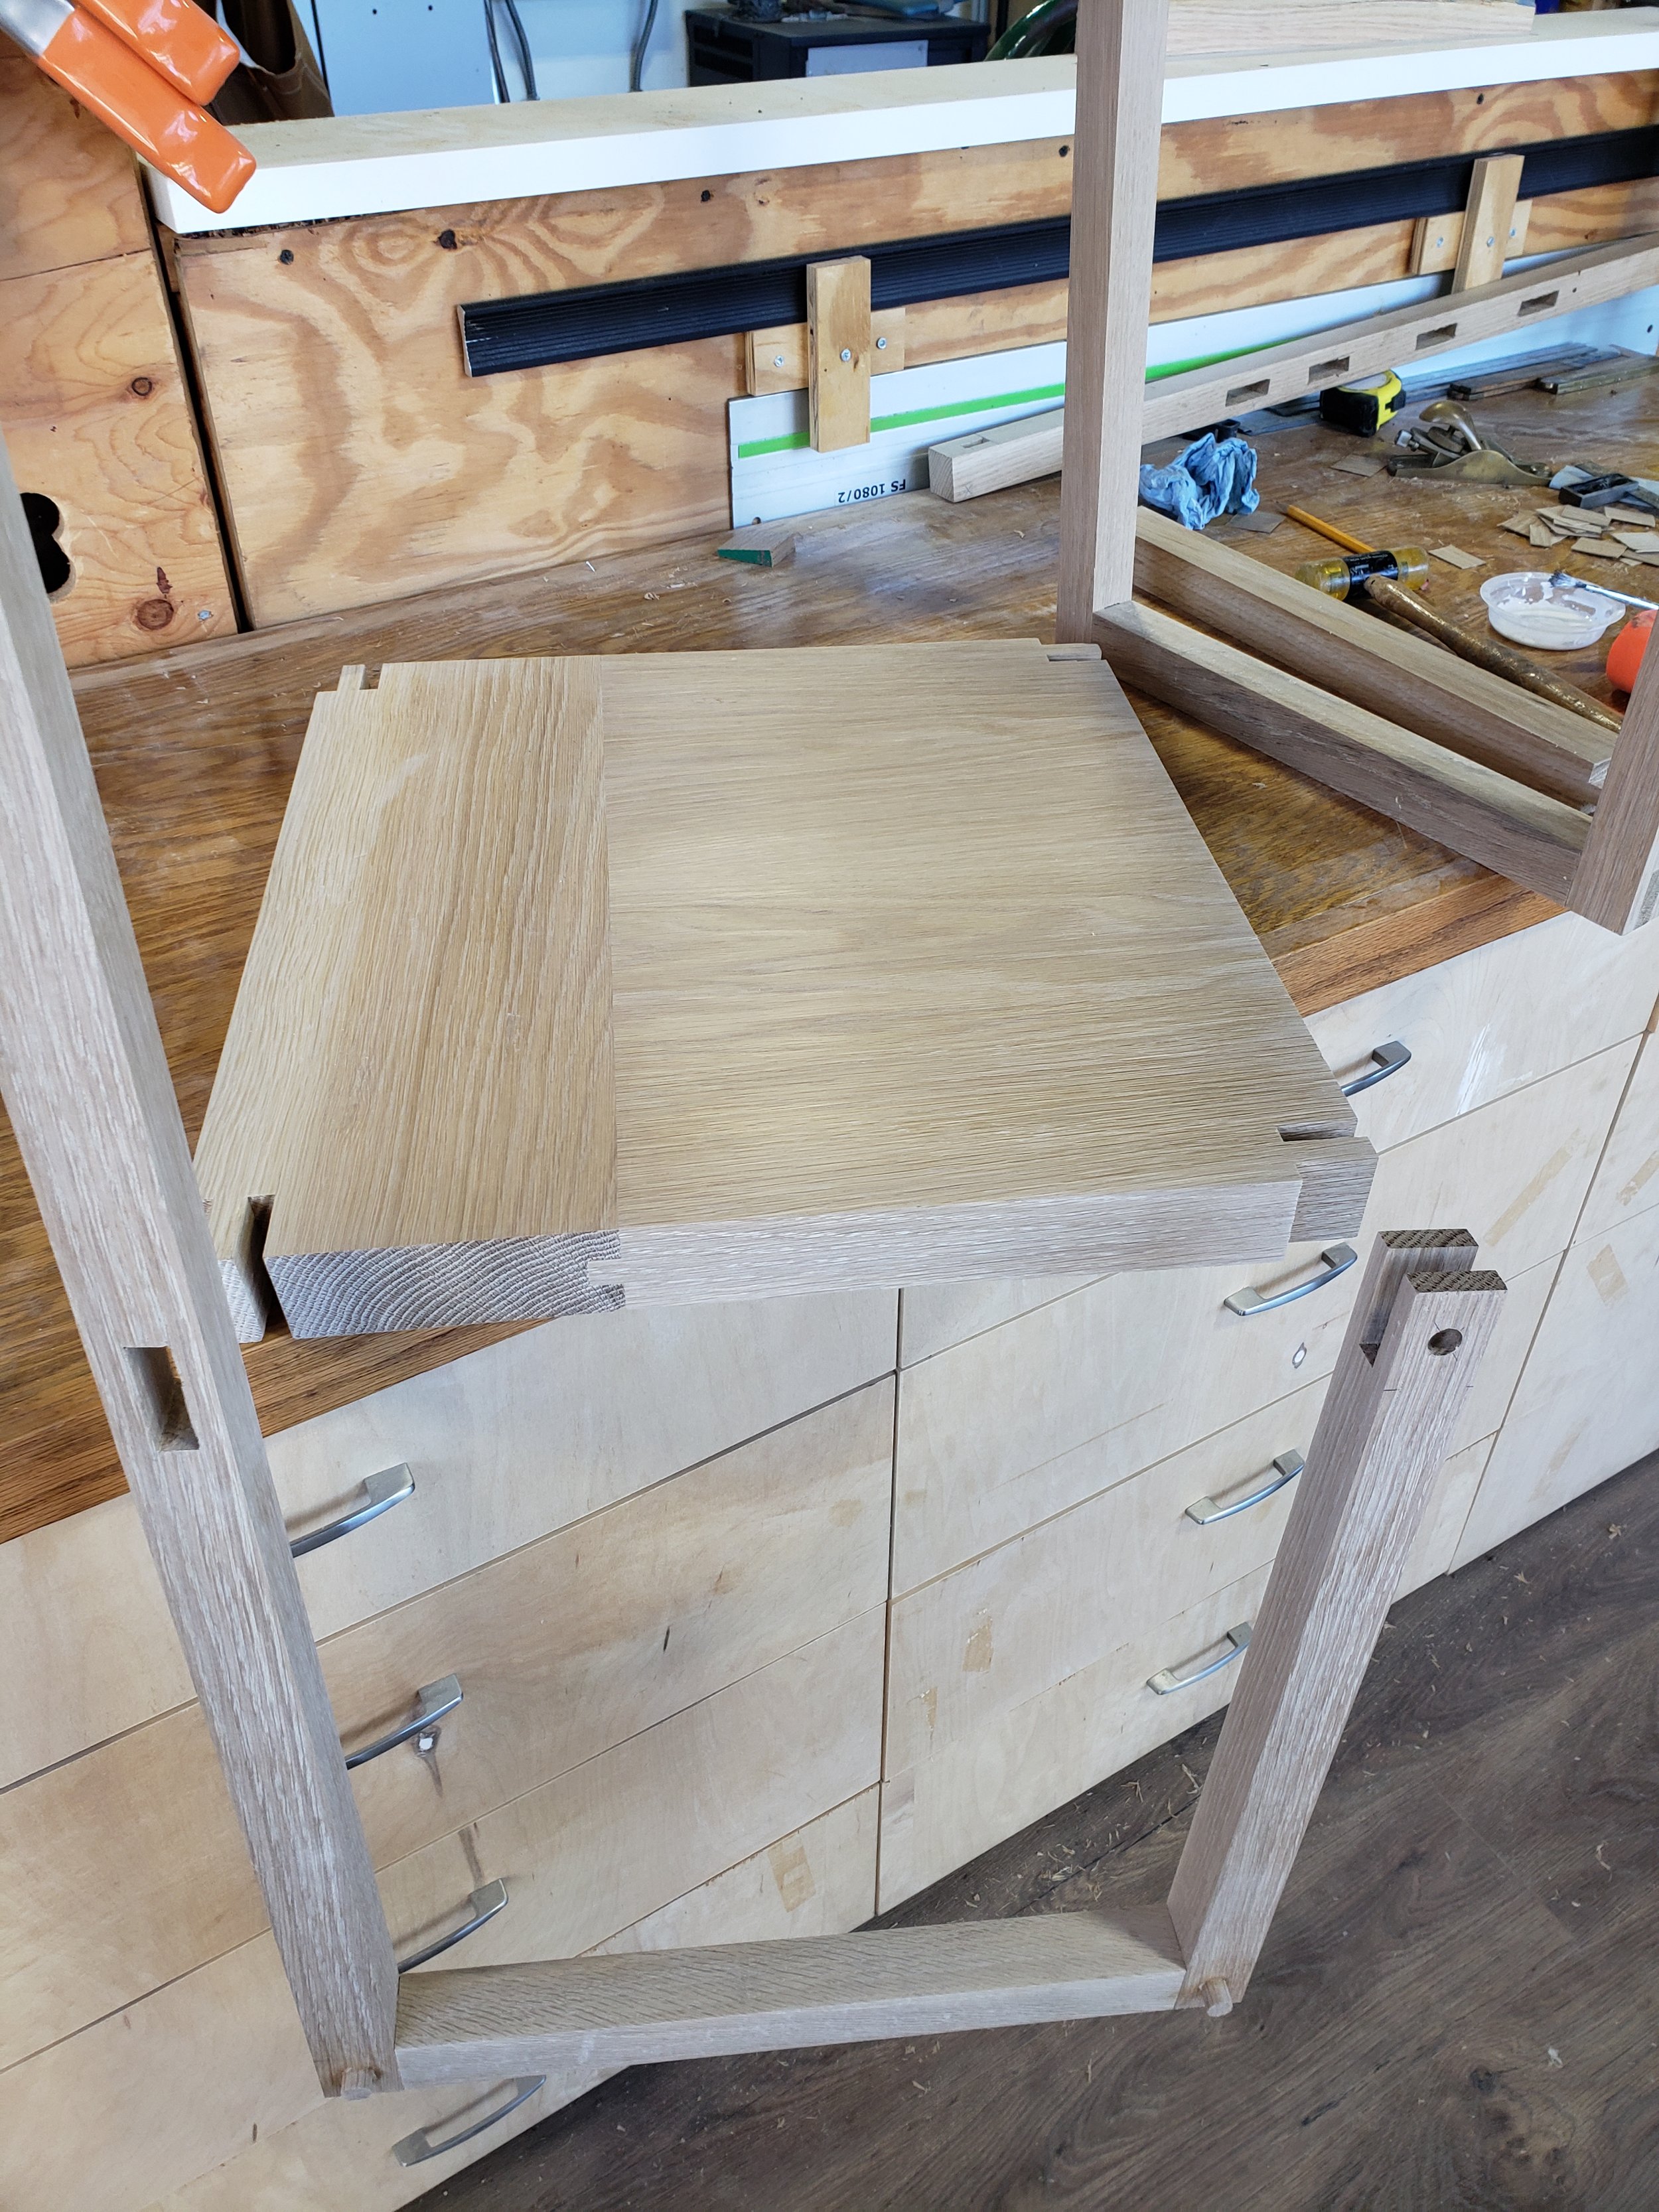 Pre-assembly, showing mortise and tenon joints